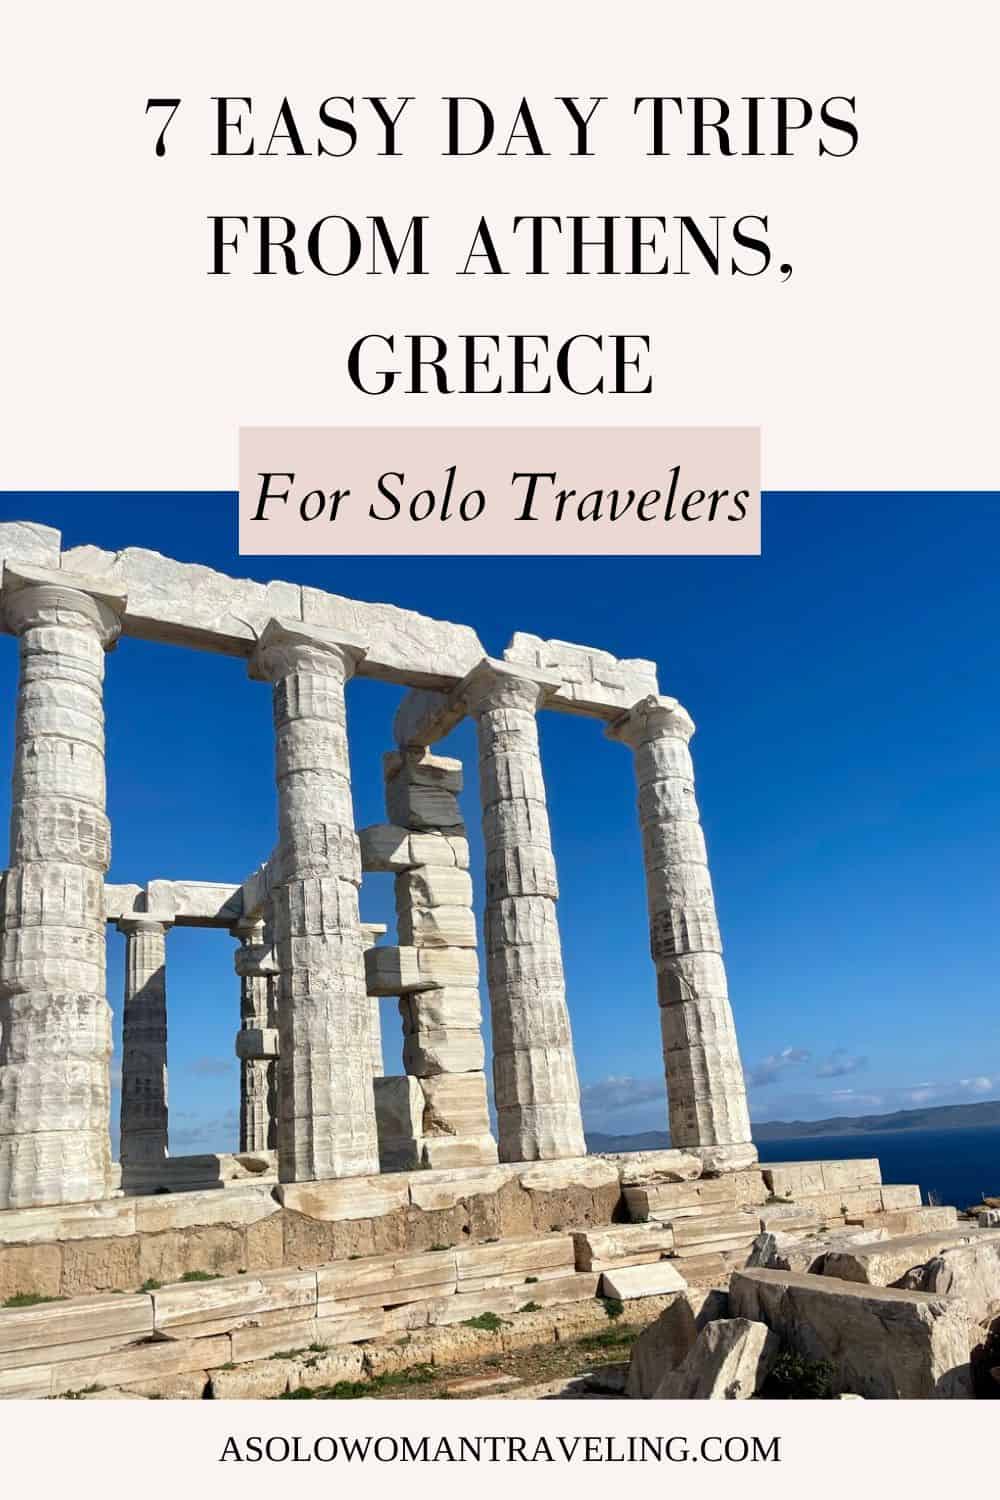 Top 7 Easy Day Trips from Athens, Greece!